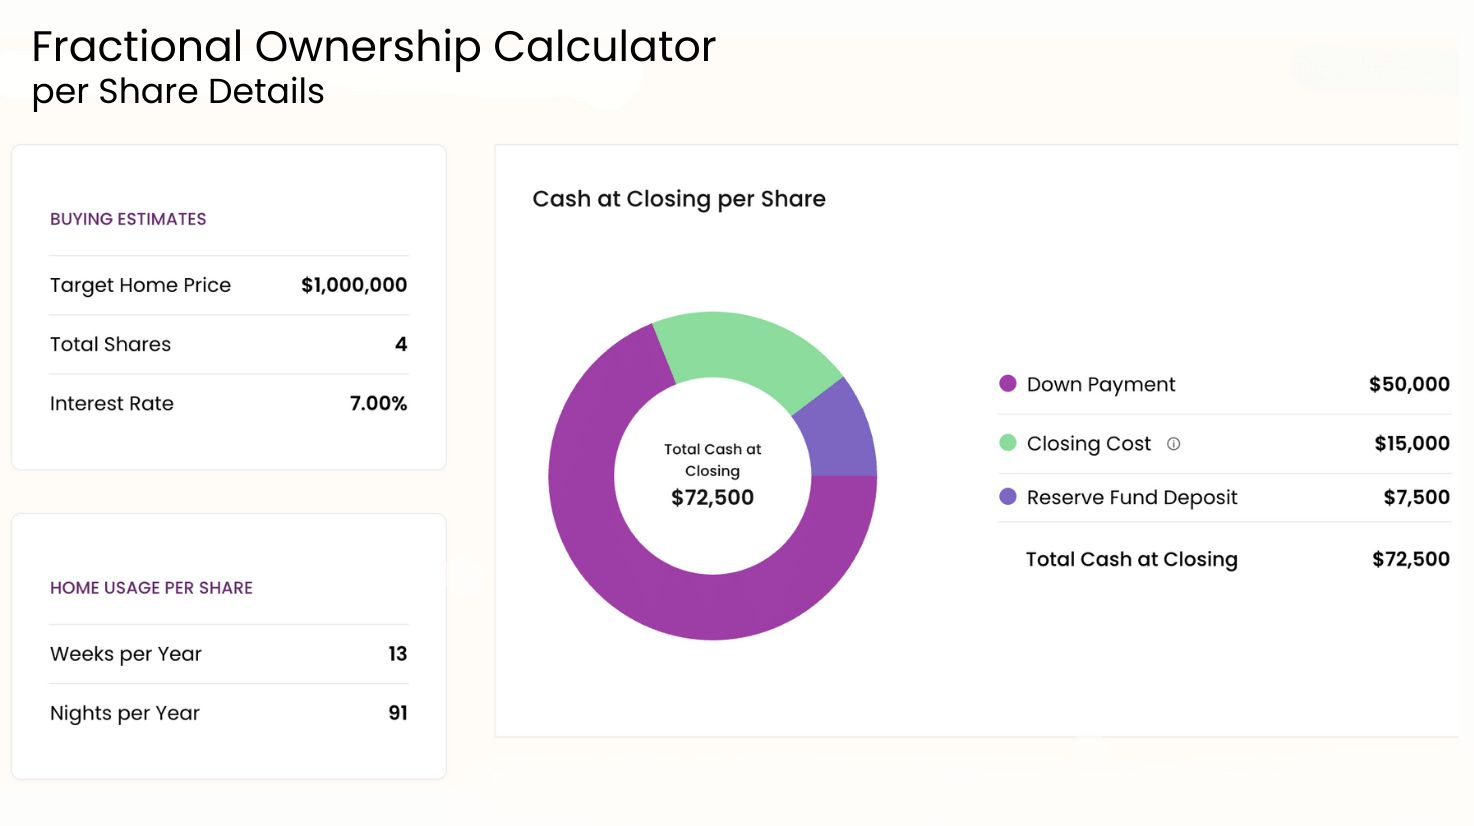 Fractional ownership calculator per share details example